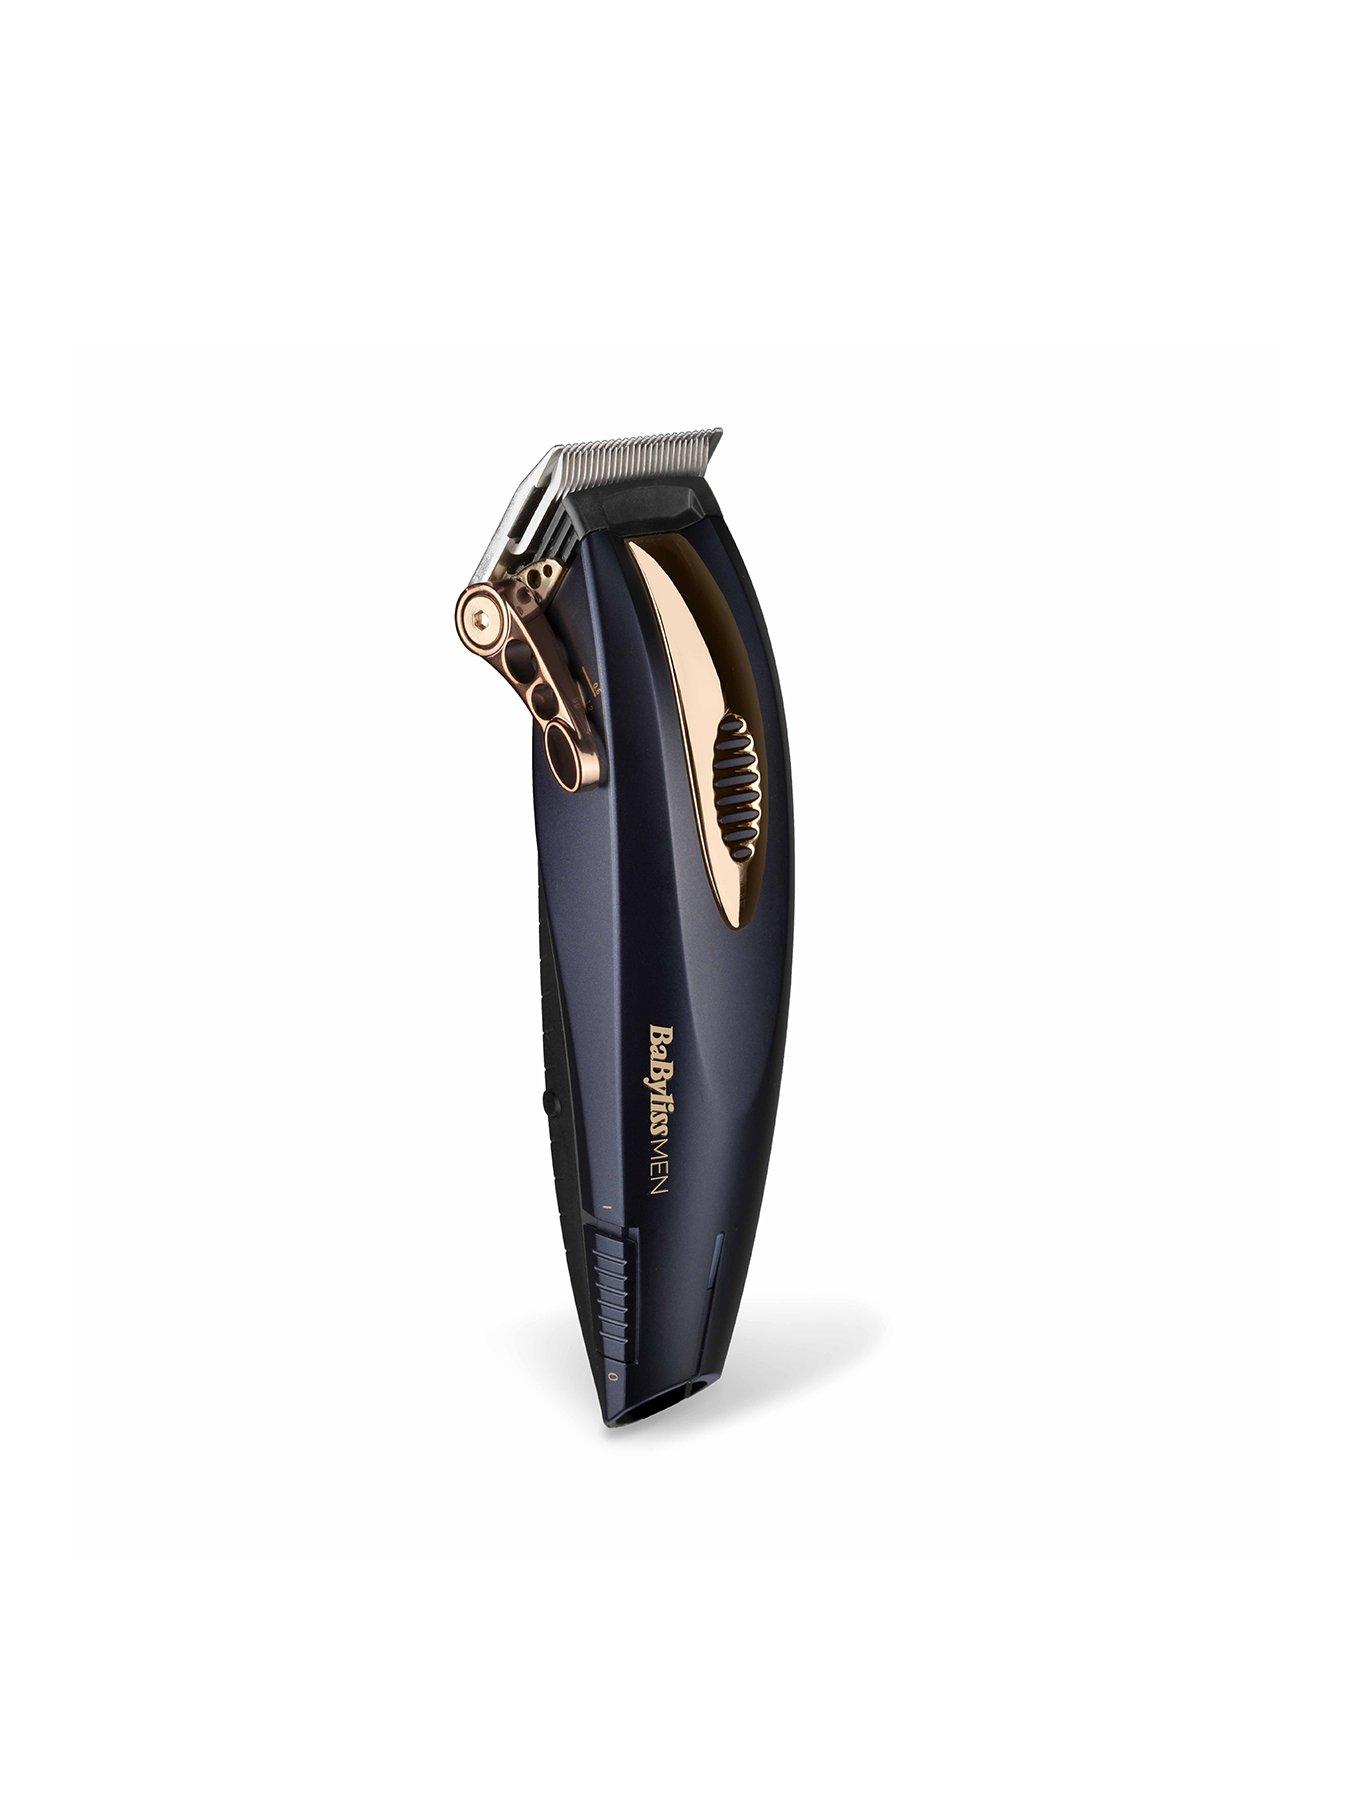 babyliss clippers ireland